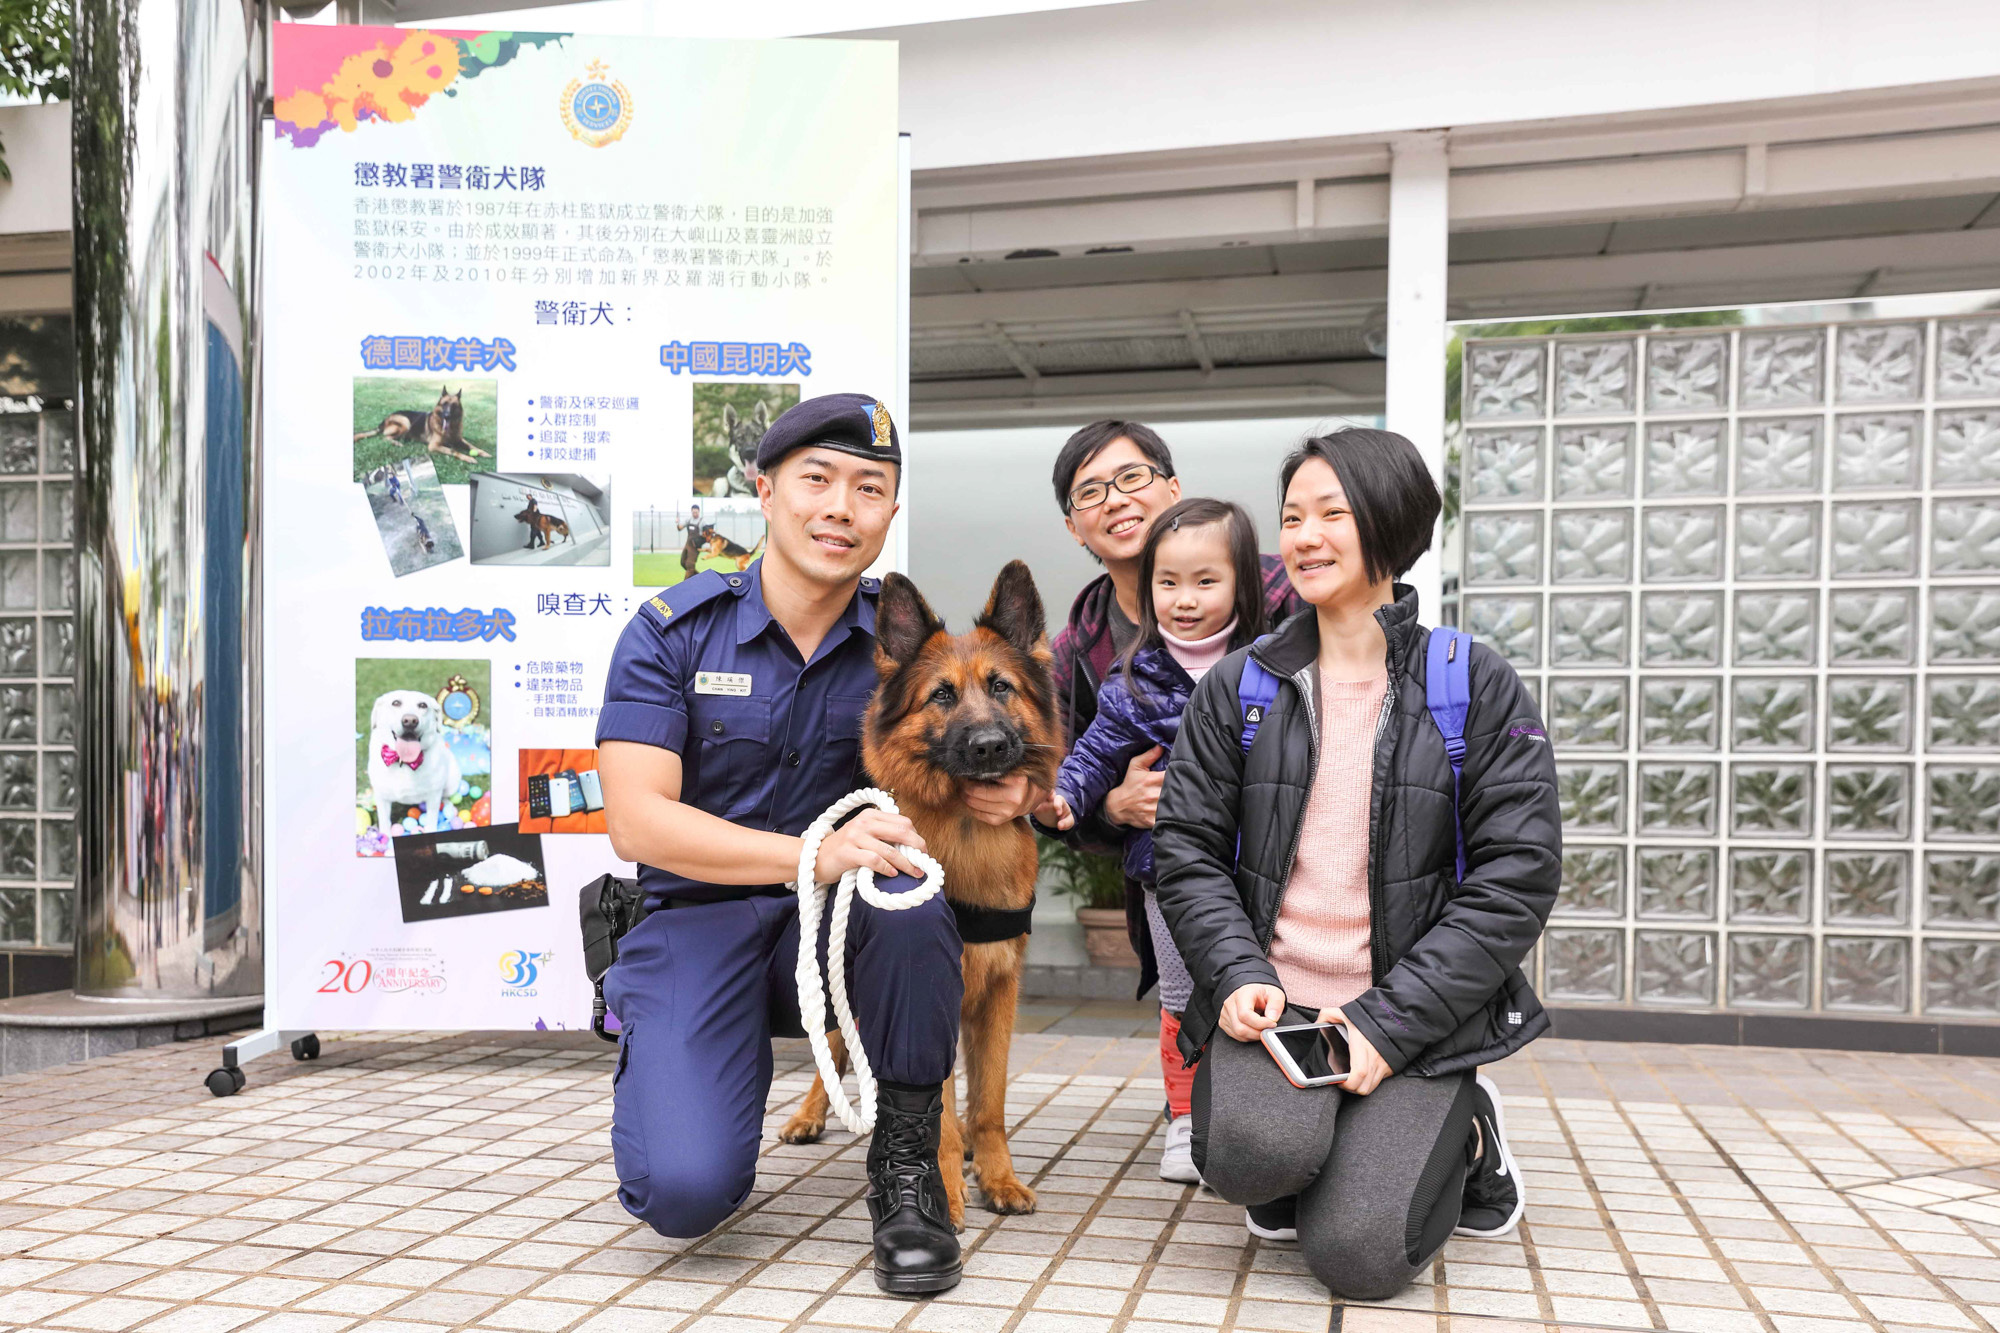 A Correctional Officer and a guard dog in a photo with visitors of the celebration event for the 35th
Anniversary of renaming Prisons Department as Correctional Services Department.